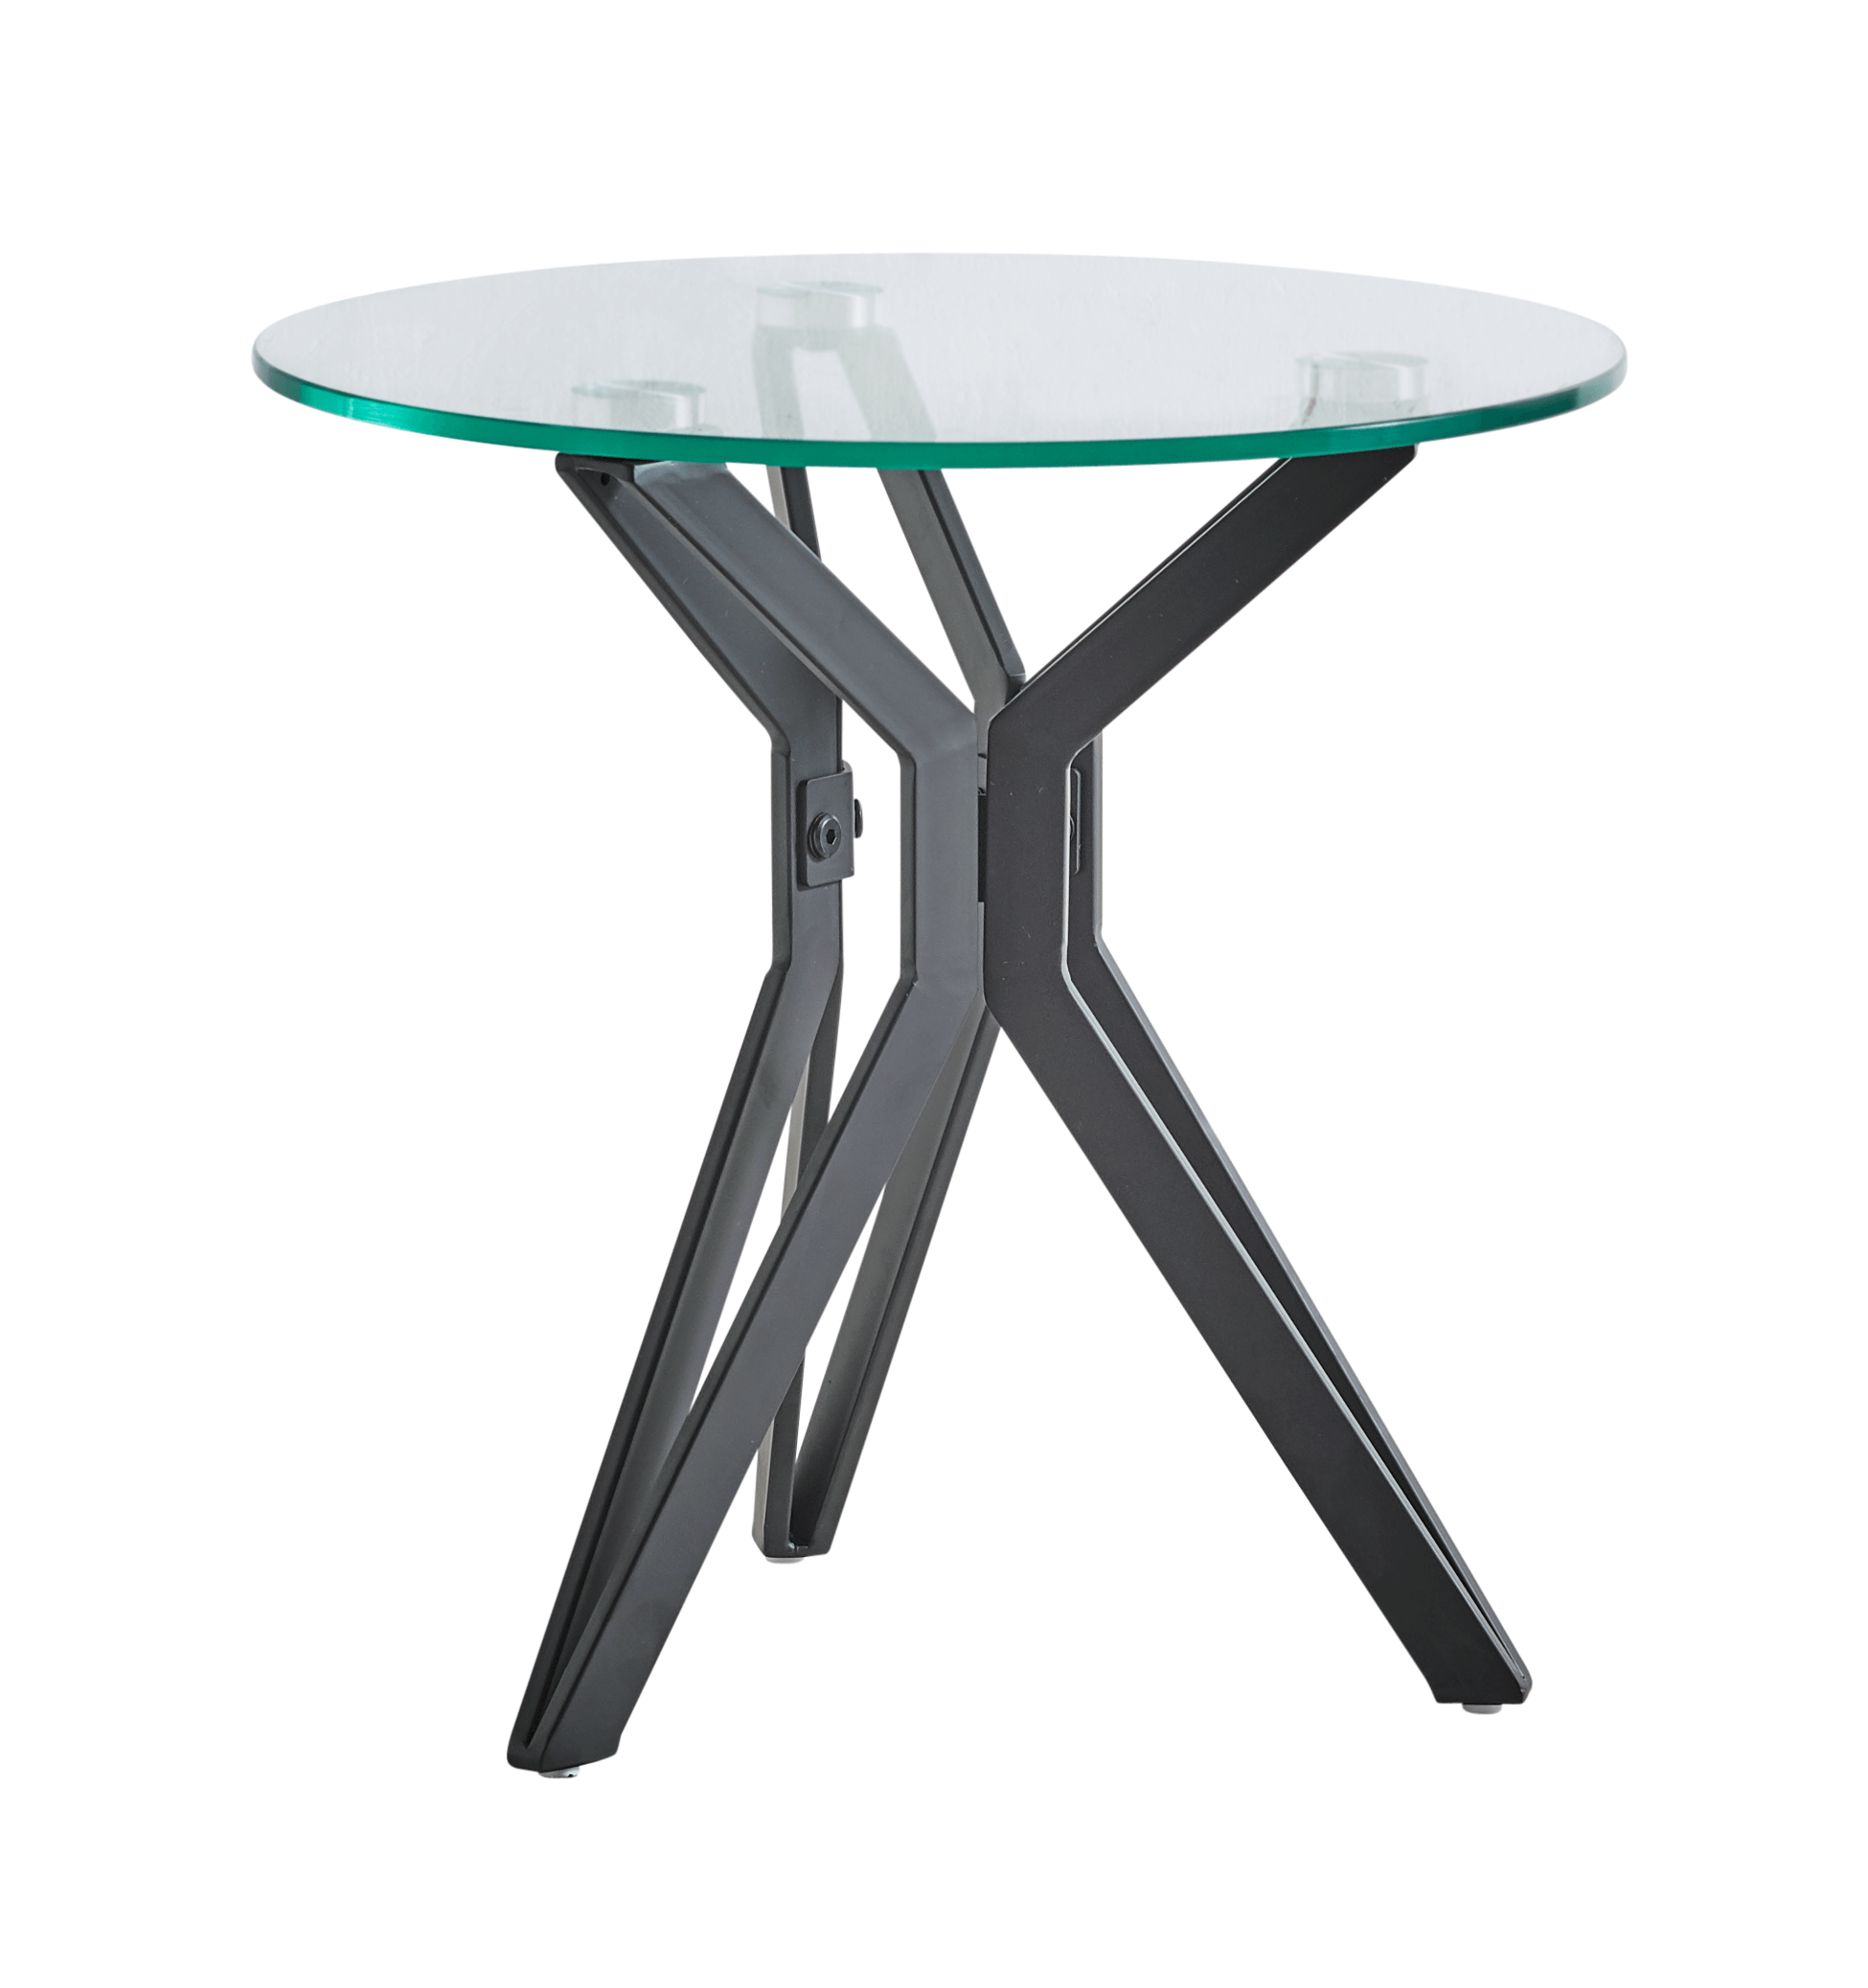 Moon: Elegant Glass Dining Settings with Unique 3-Star Legs